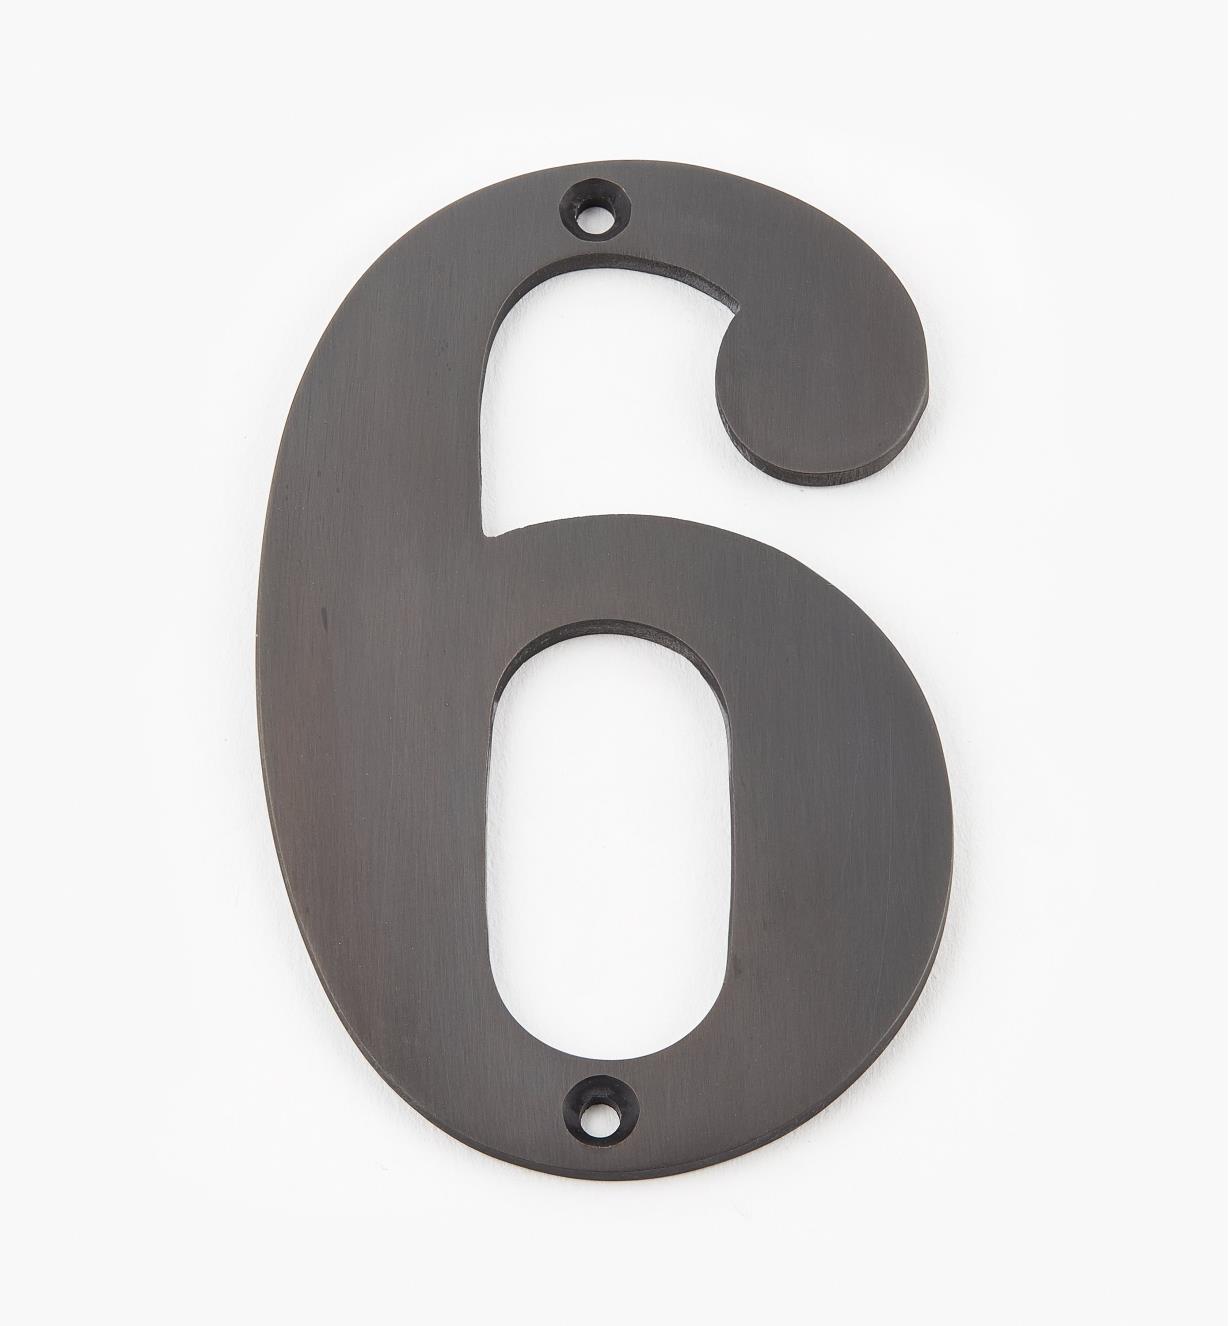 00W0576 - 4" Standard Oil-Rubbed Bronze Number - 6